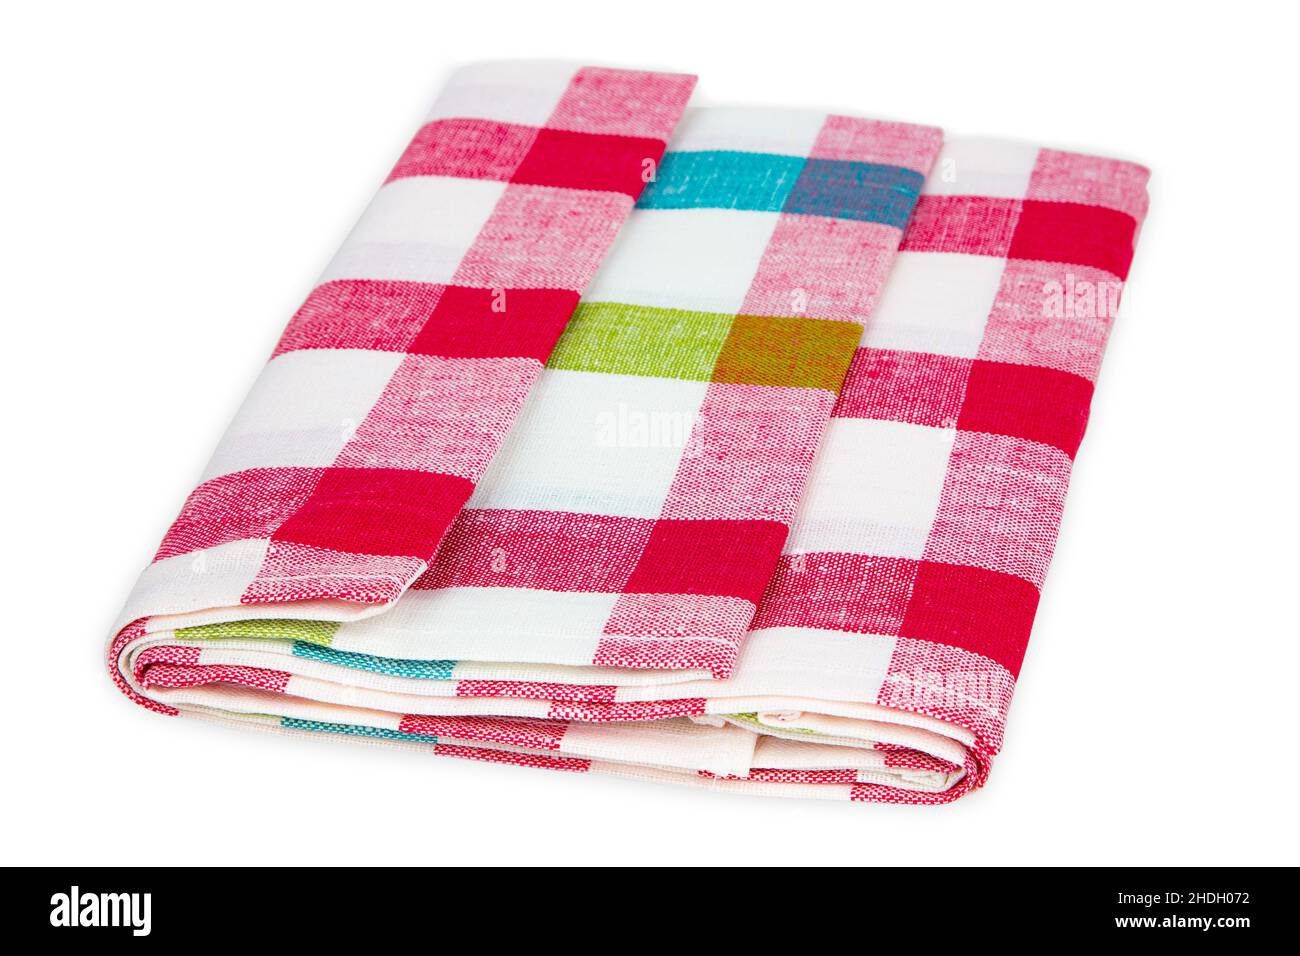 https://c8.alamy.com/comp/2HDH072/dishes-towel-dishes-towels-2HDH072.jpg